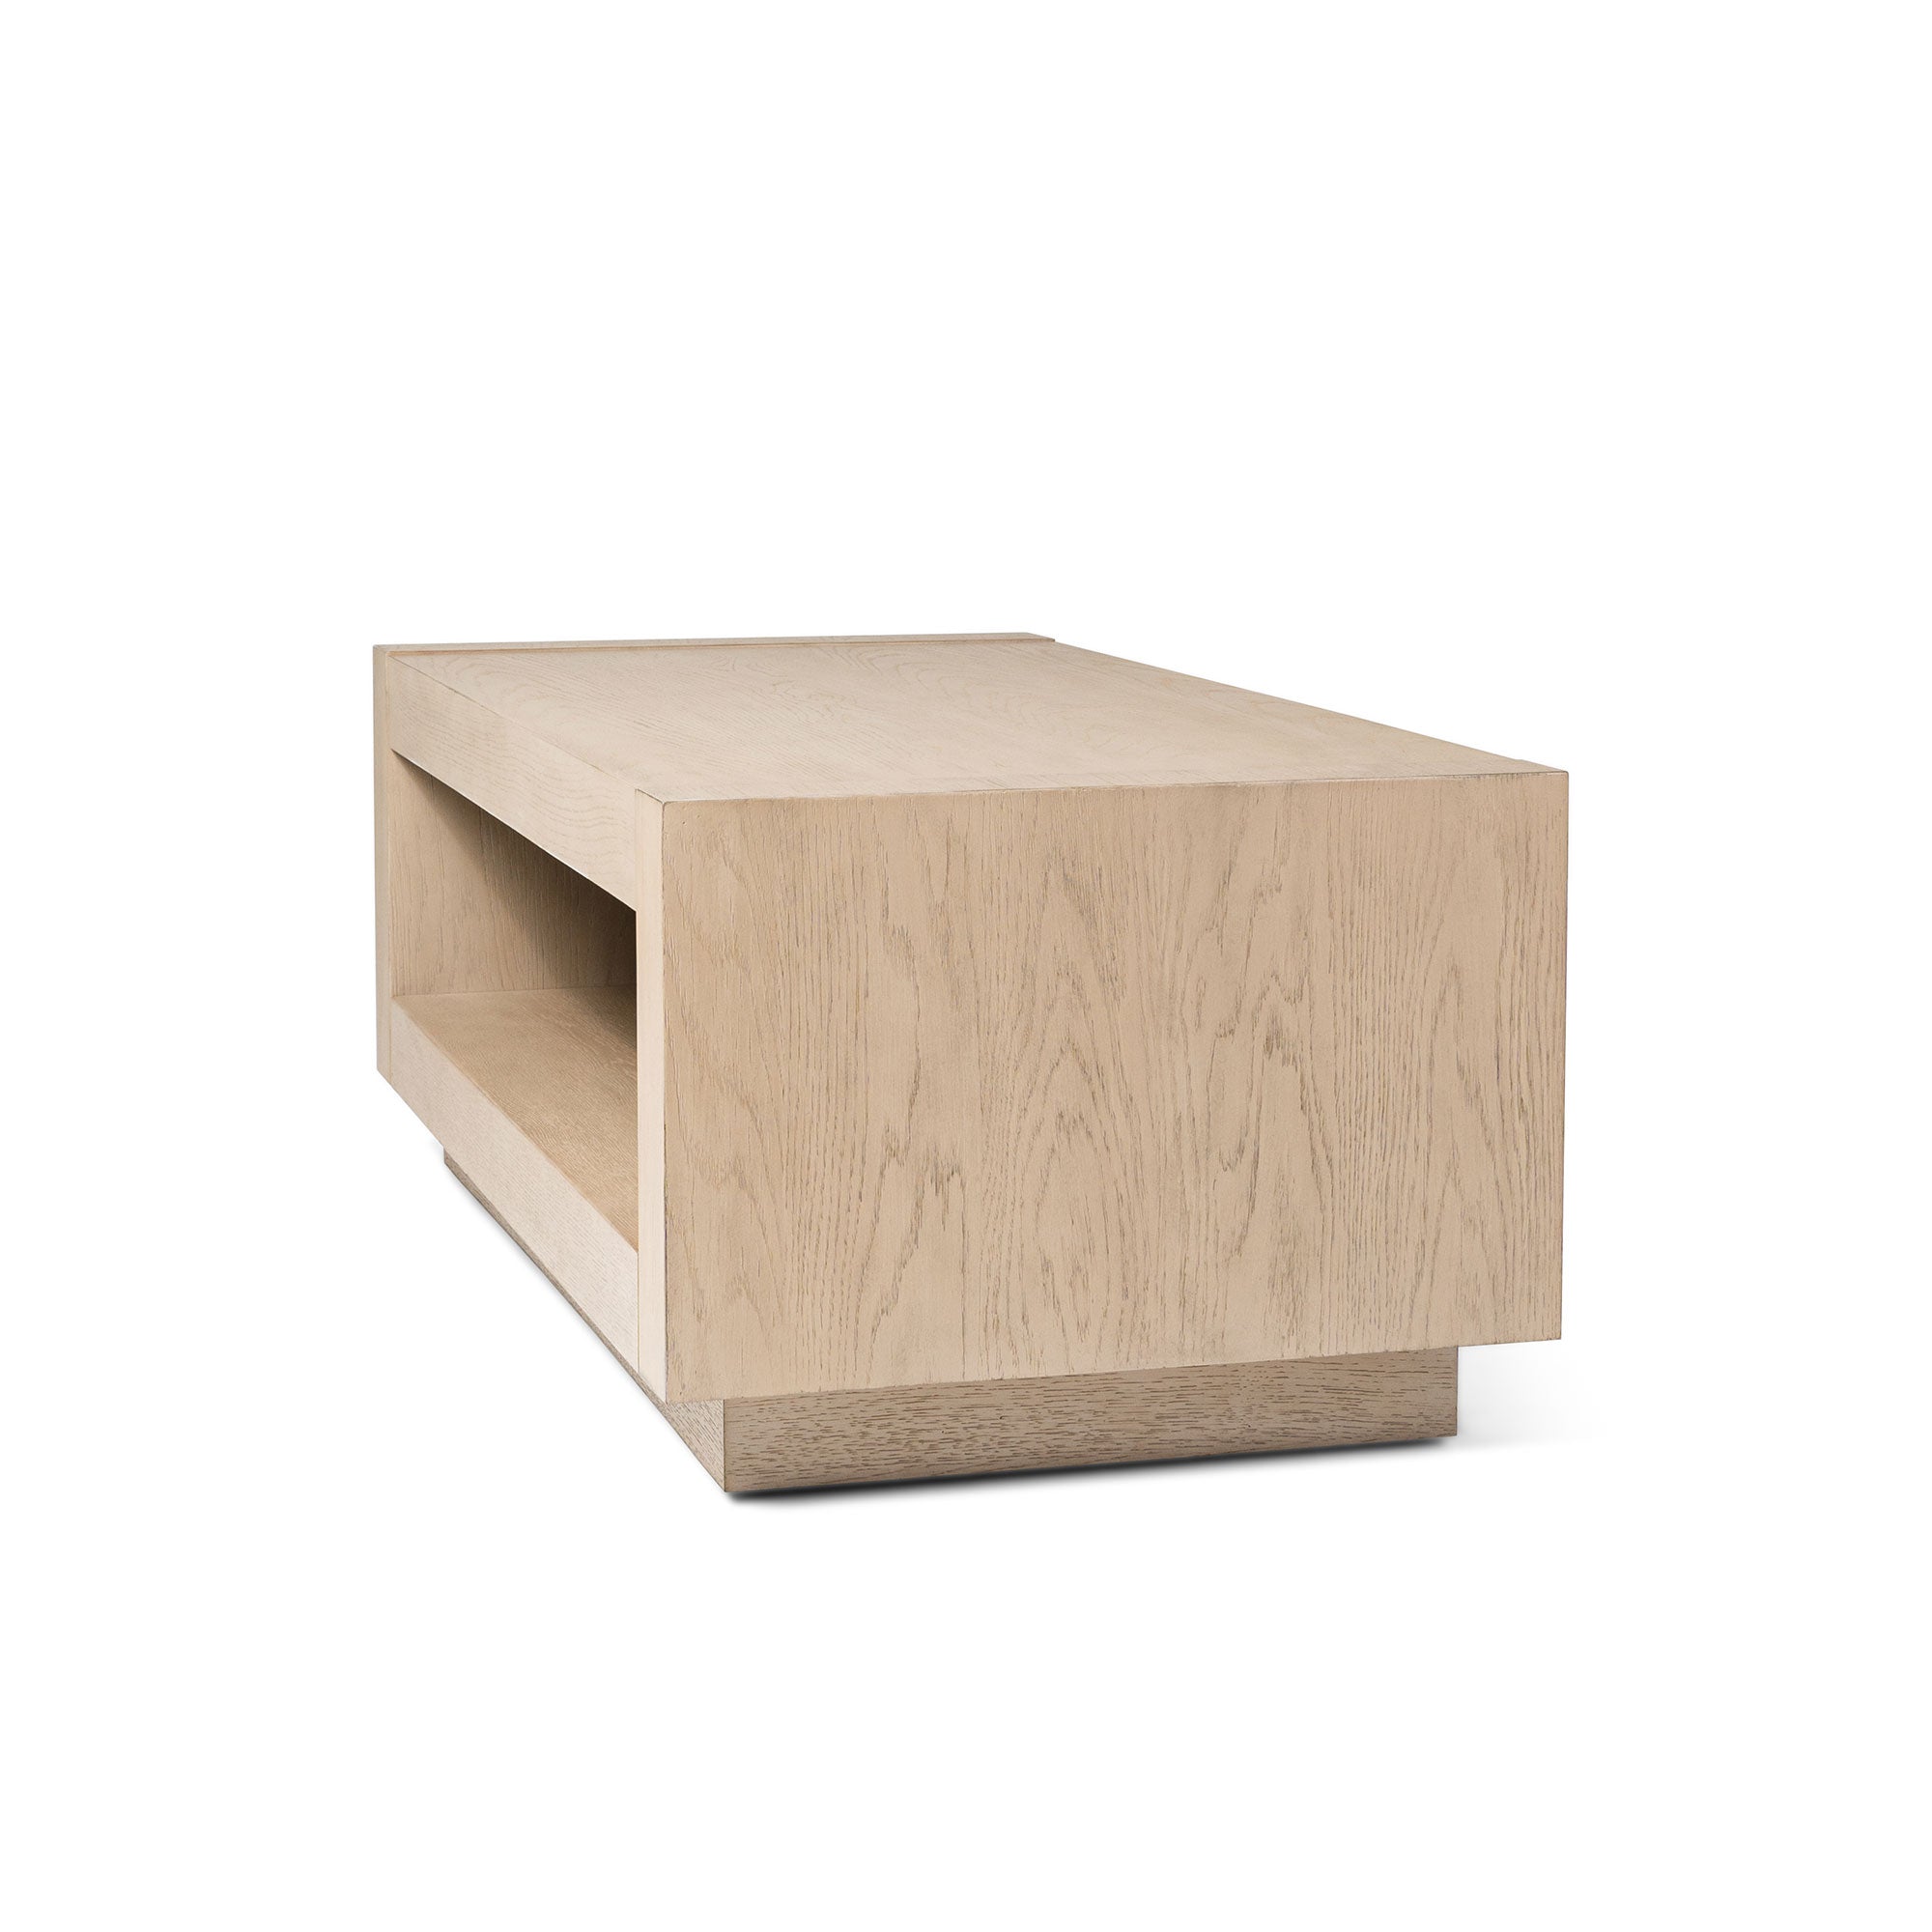 Artemis Contemporary Wooden Coffee Table in Refined White Finish in Accent Tables by Maven Lane